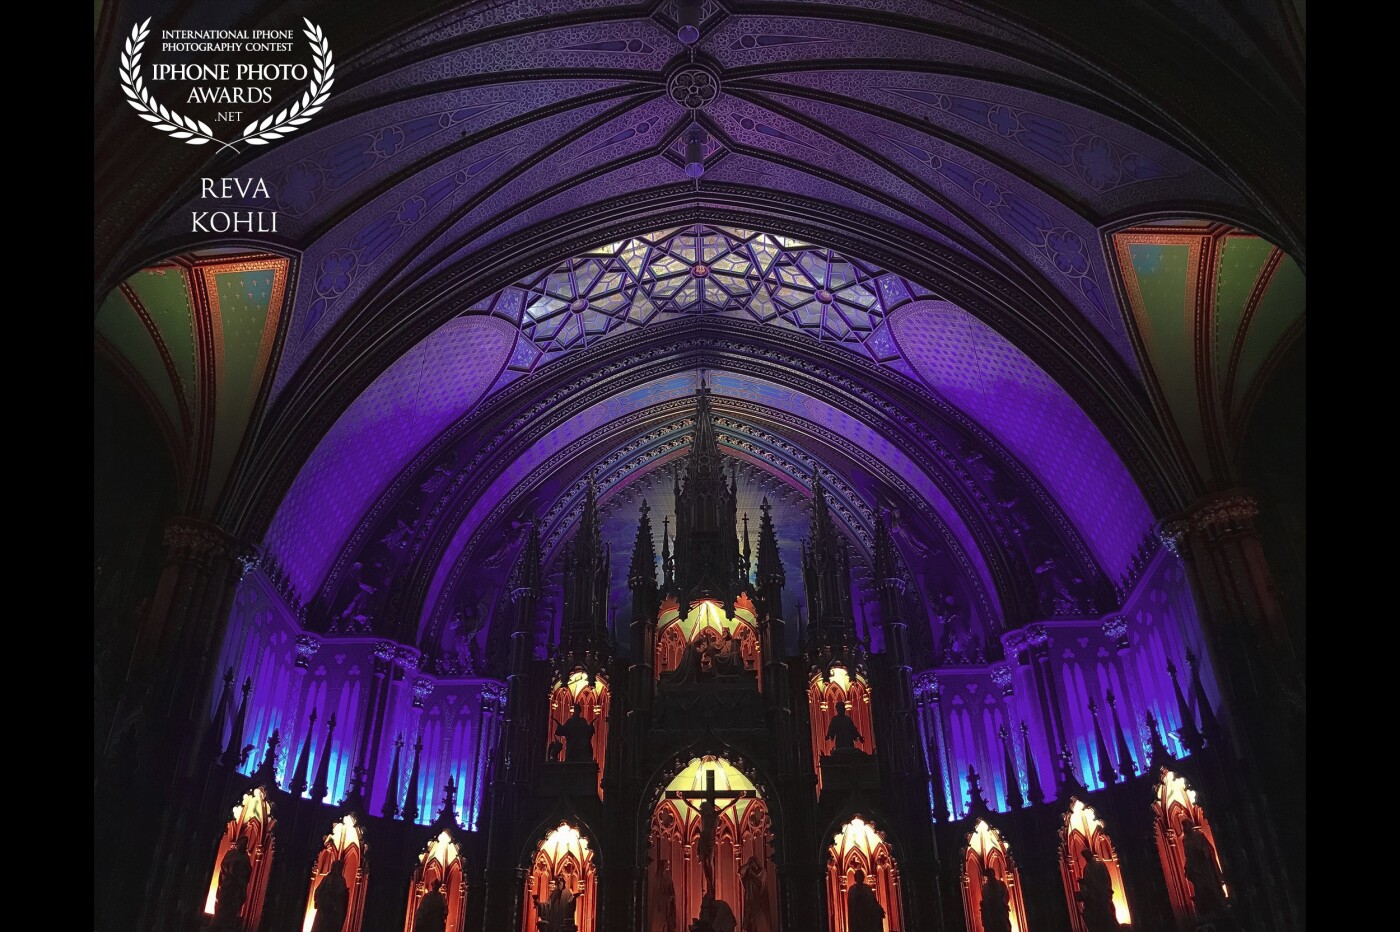 The beautiful interiors of the majestic Notre-Dame Basilica Church, Montreal. This was shot right after a breathtaking sound and light show at the church called the “Aura” which is absolutely surreal and gives you an experience of a lifetime, it felt like I'm healing from within... This is a must go-to show if you visit Montreal, 